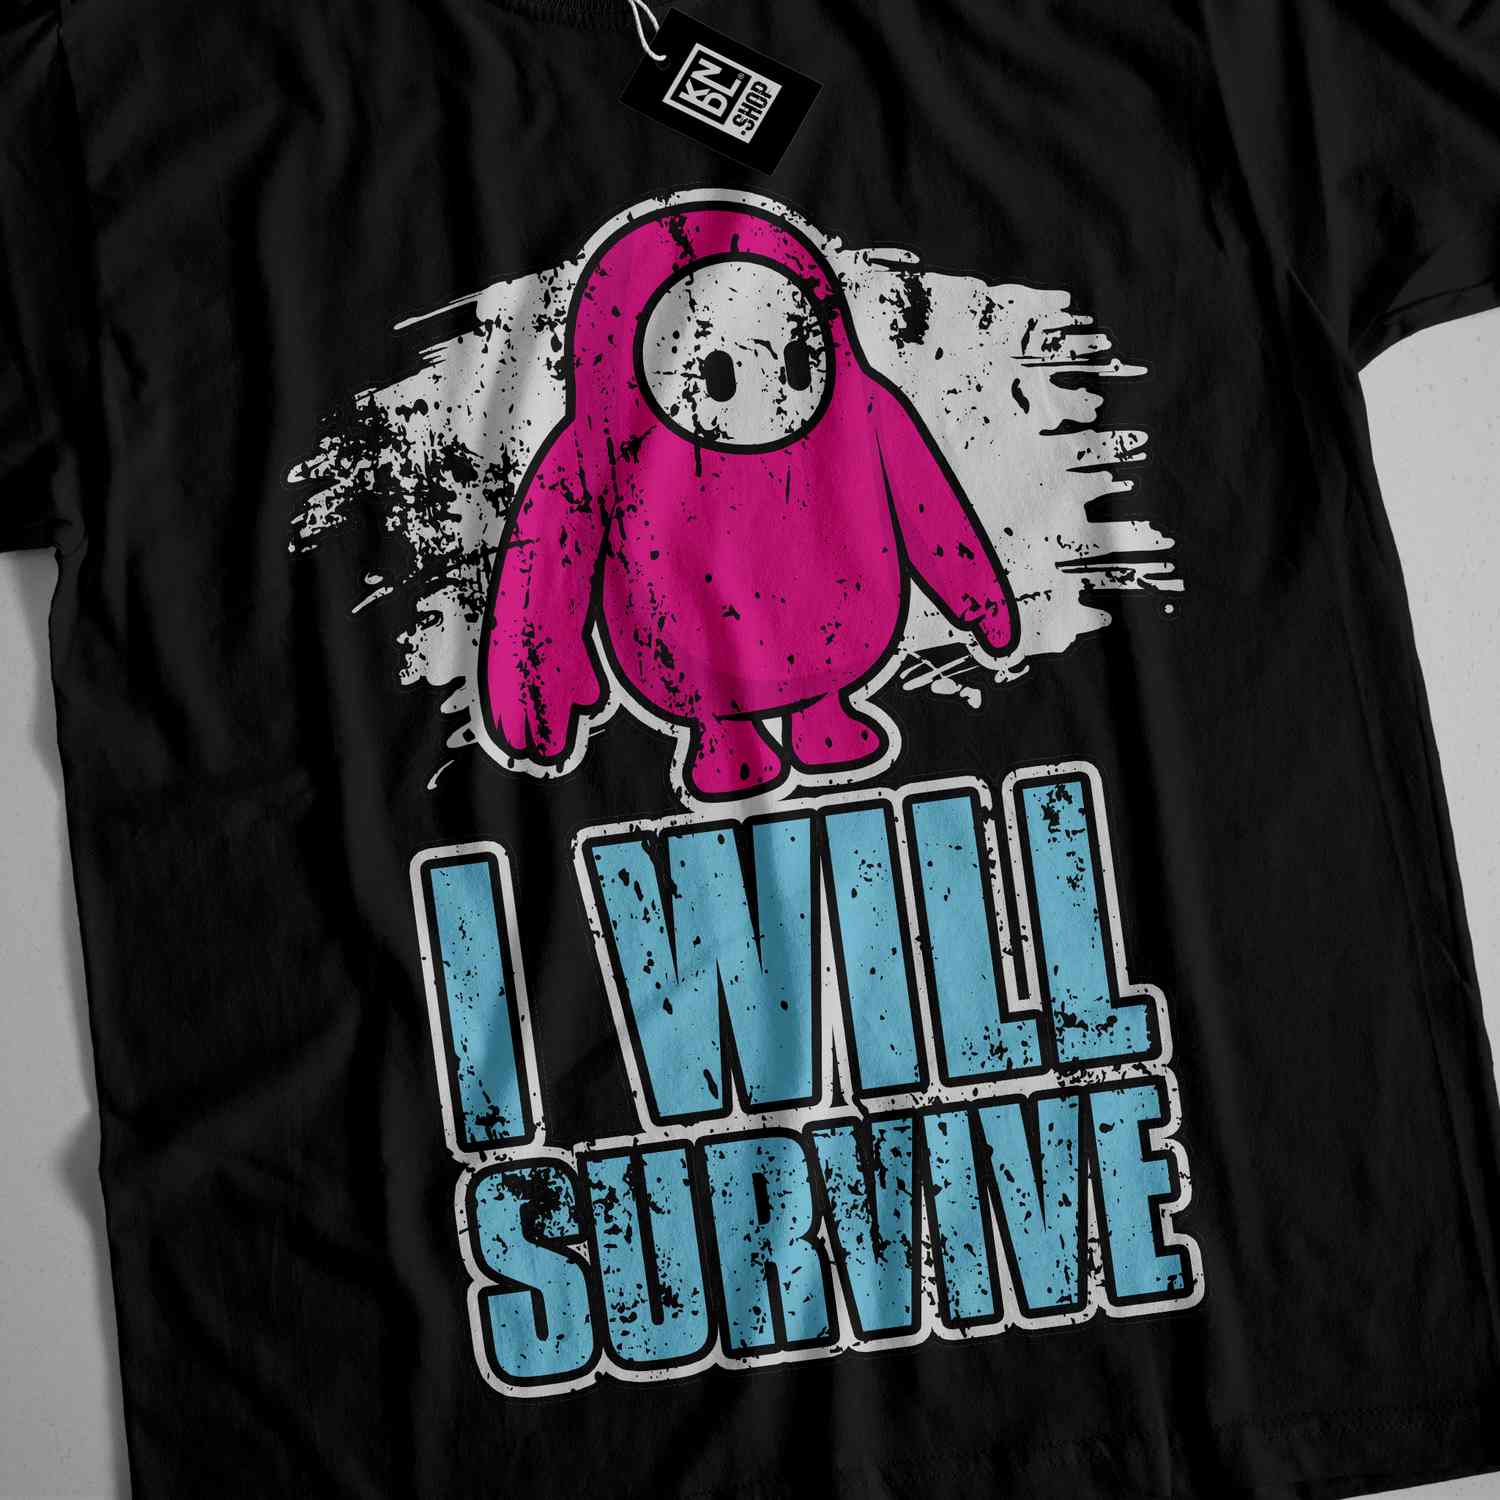 a black t - shirt with a pink teddy bear on it